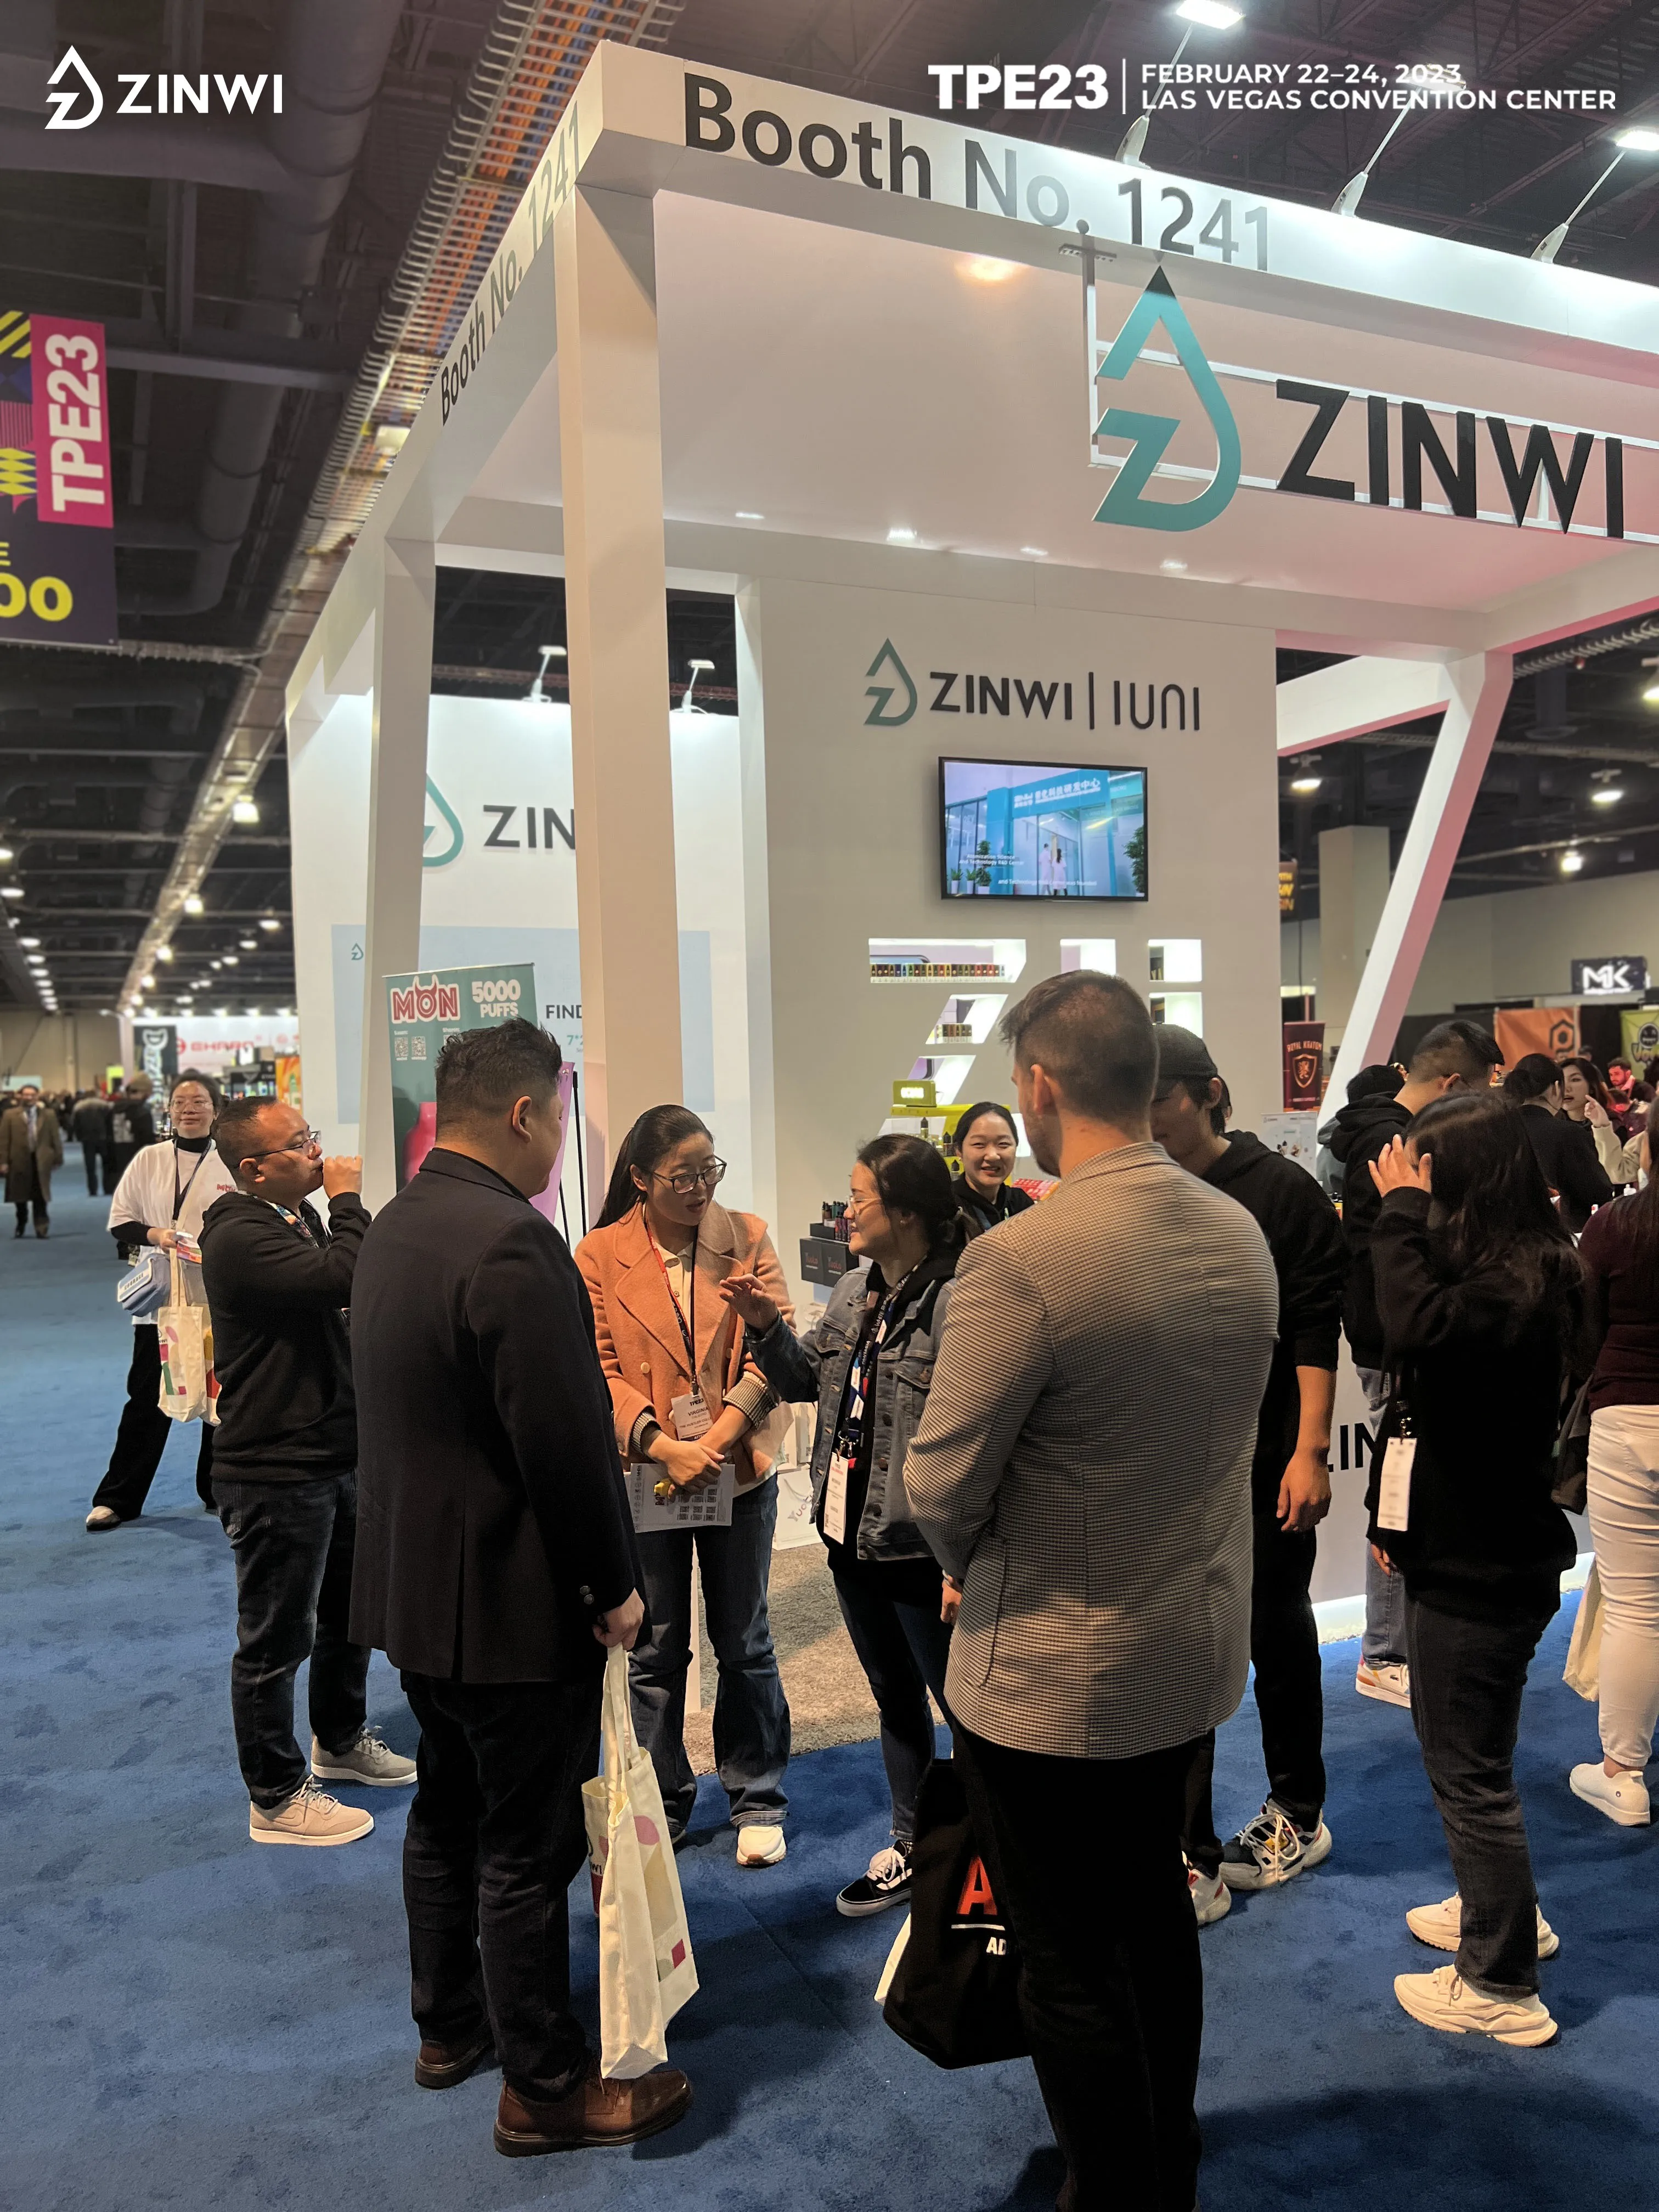 As of the second day of the exhibition, there are many exhibitors have visited the exhibition area of Zinwi Biotech, communicated and cooperated with the staff, and experienced Zinwi's high-quality e-liquid.